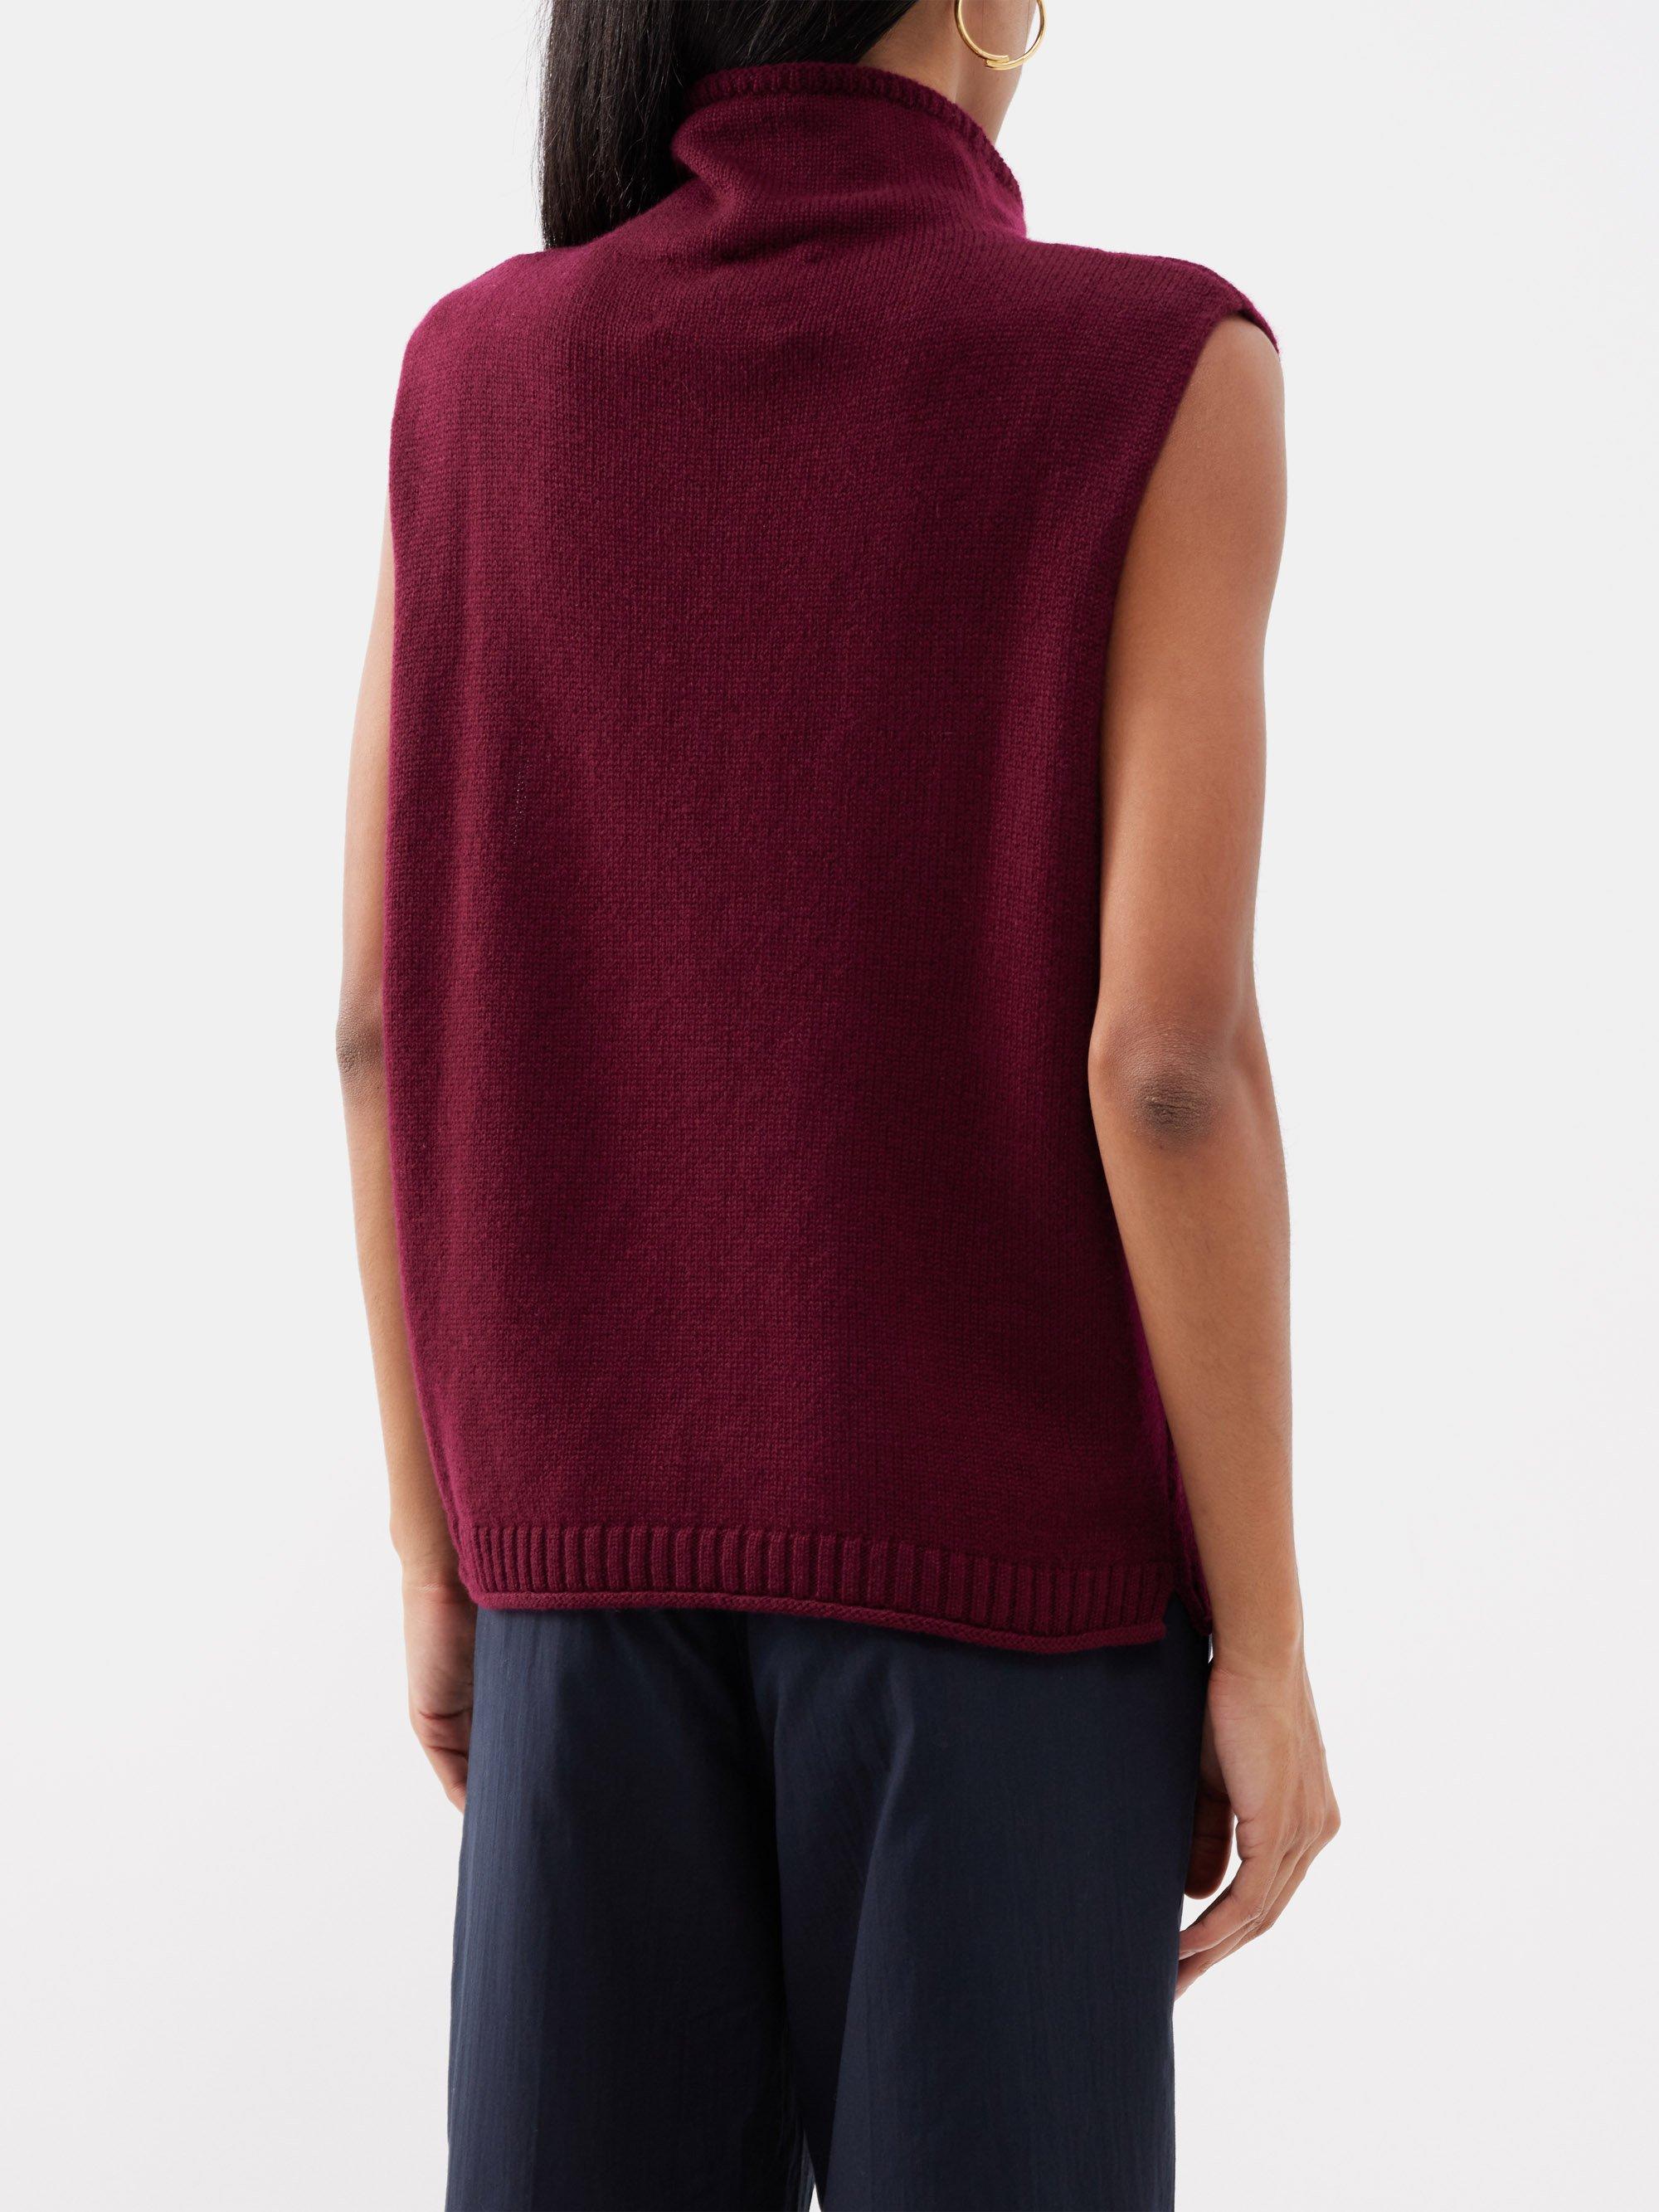 Lisa Yang Tova High-neck Cashmere Sweater Vest in Red | Lyst